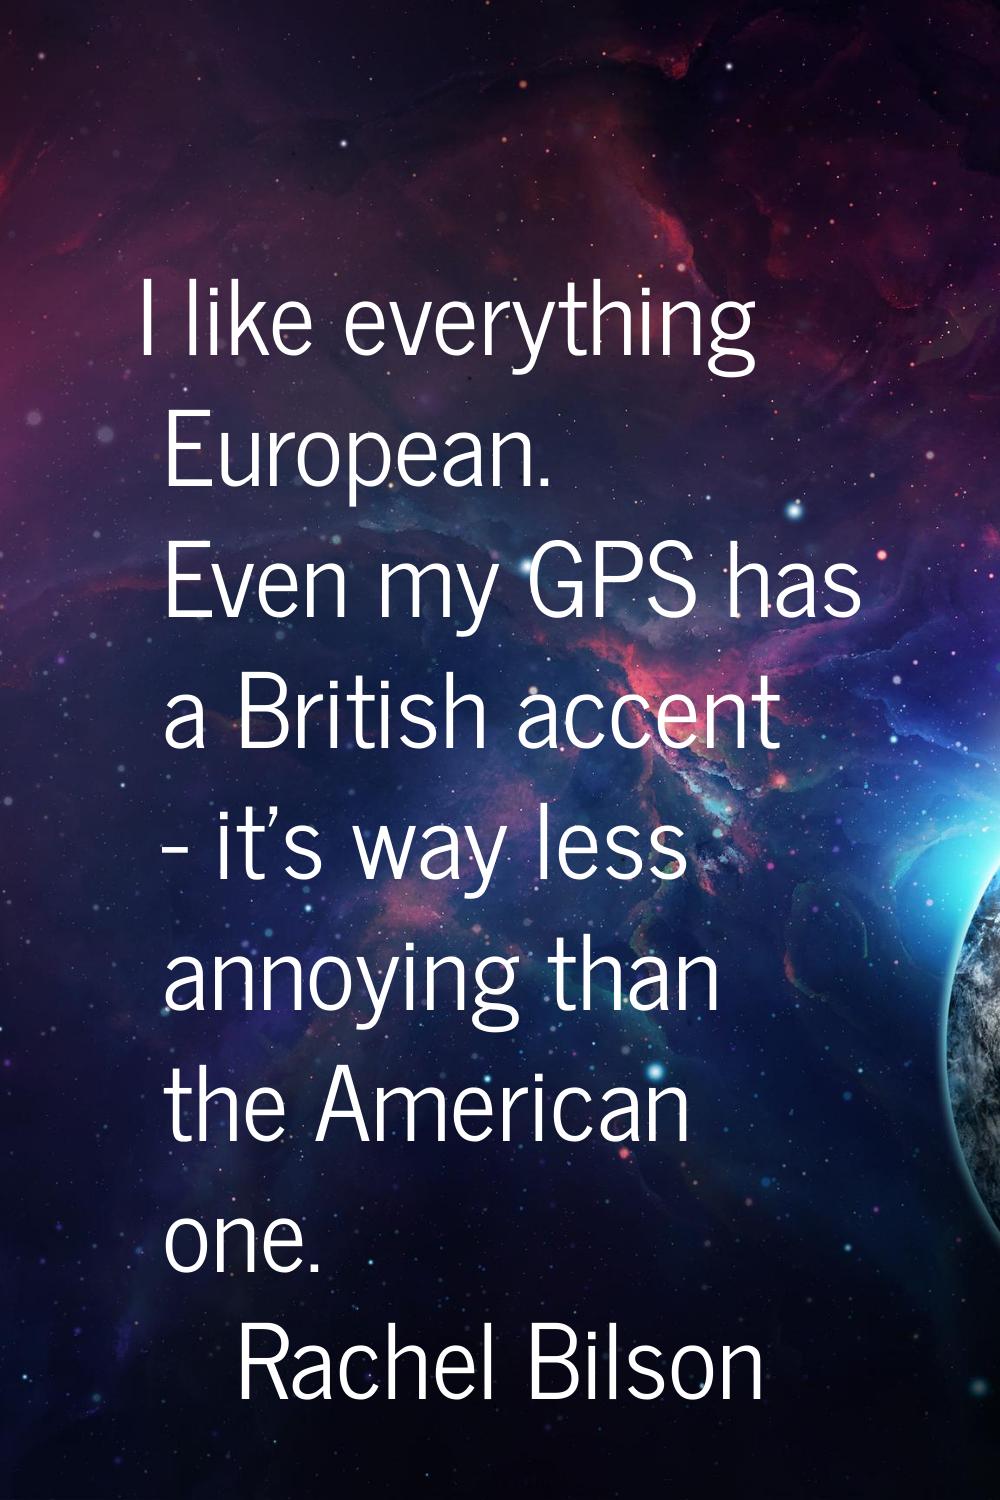 I like everything European. Even my GPS has a British accent - it's way less annoying than the Amer